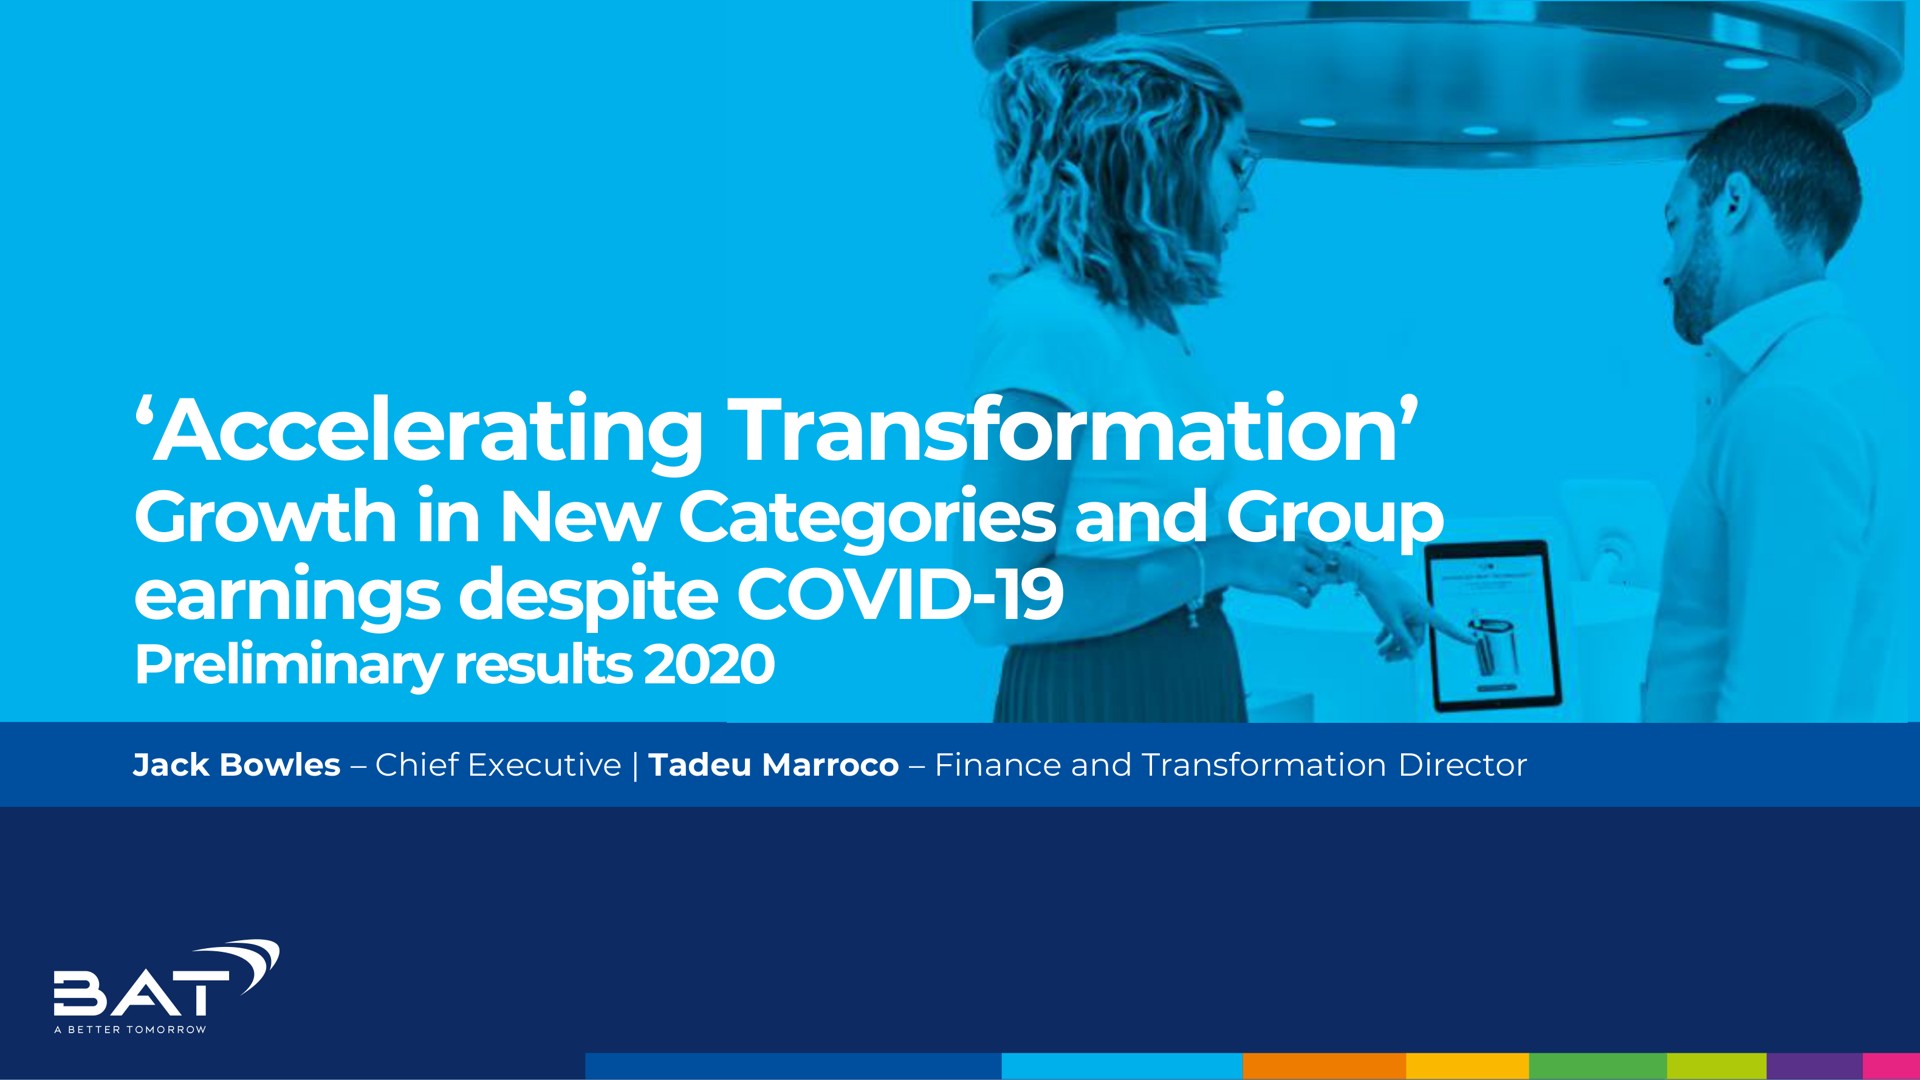 accelerating transformation growth in new categories and group earnings despite covid preliminary results | BAT